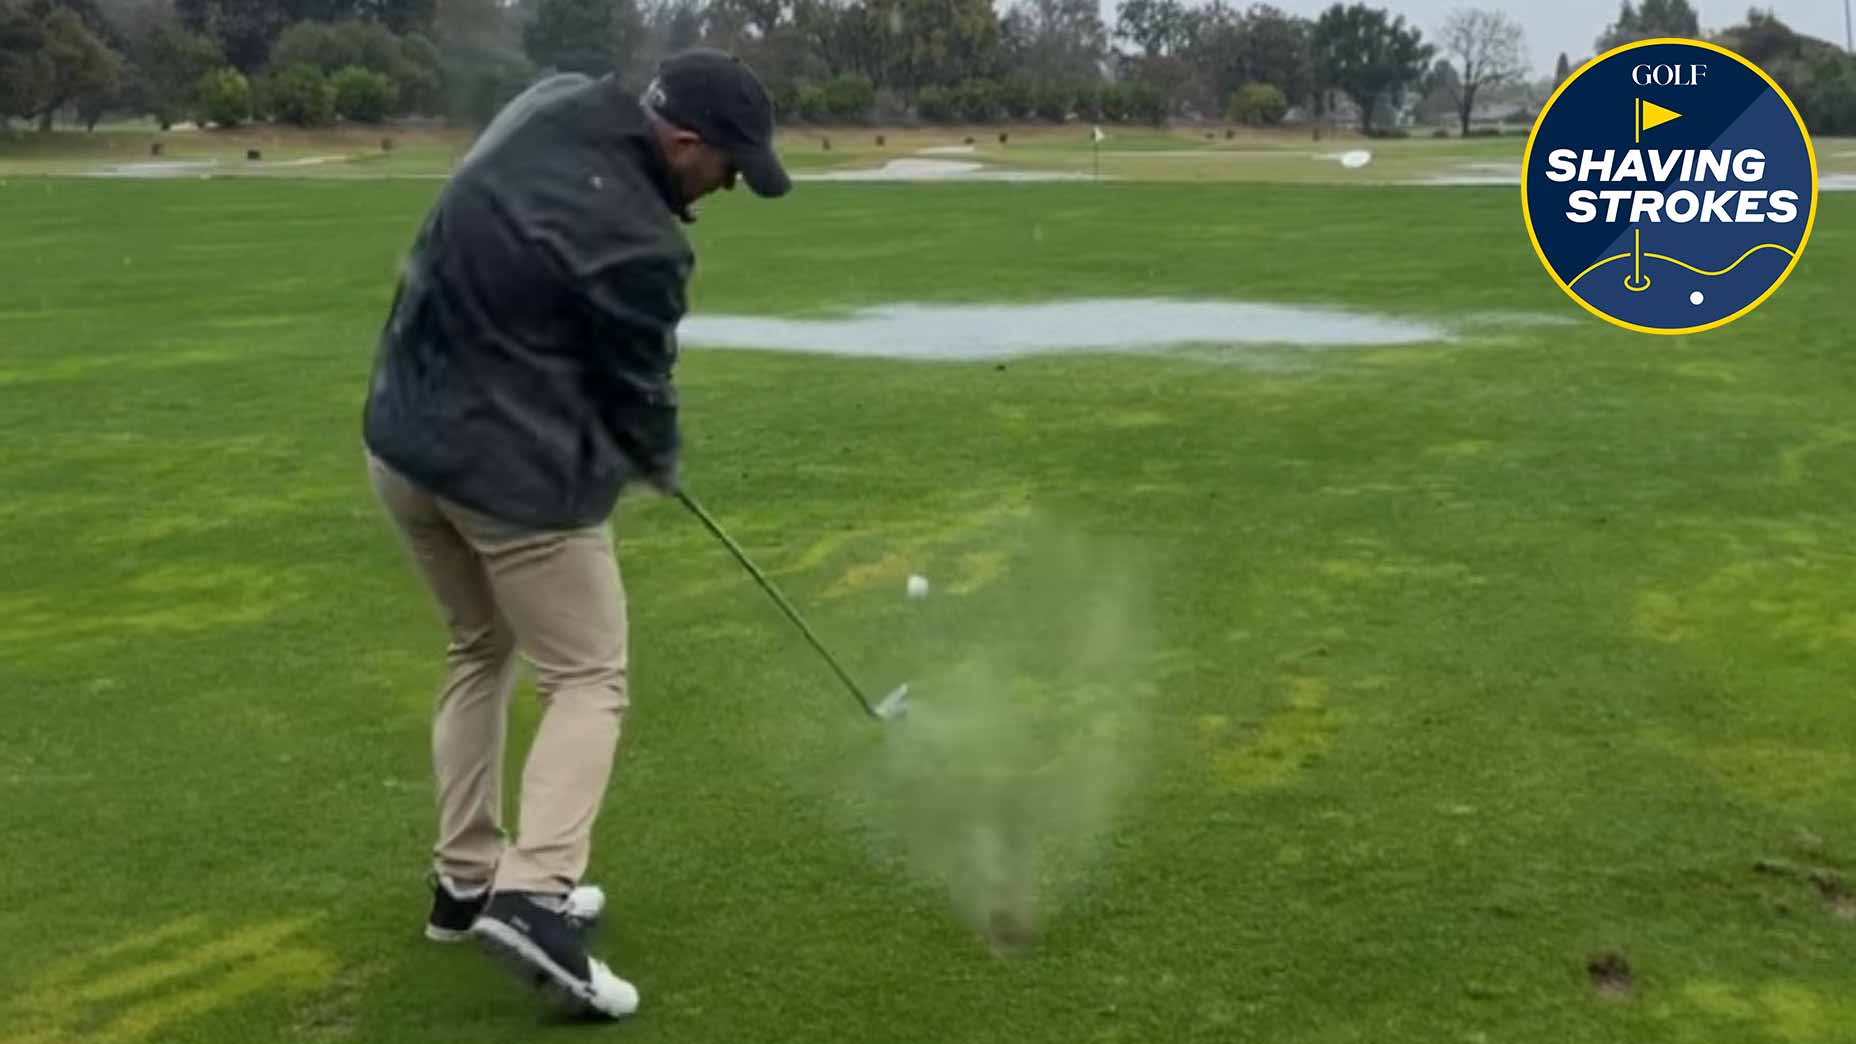 Winter Golf Tips: 8 Ways to Play your Best in the Cold - The Left Rough